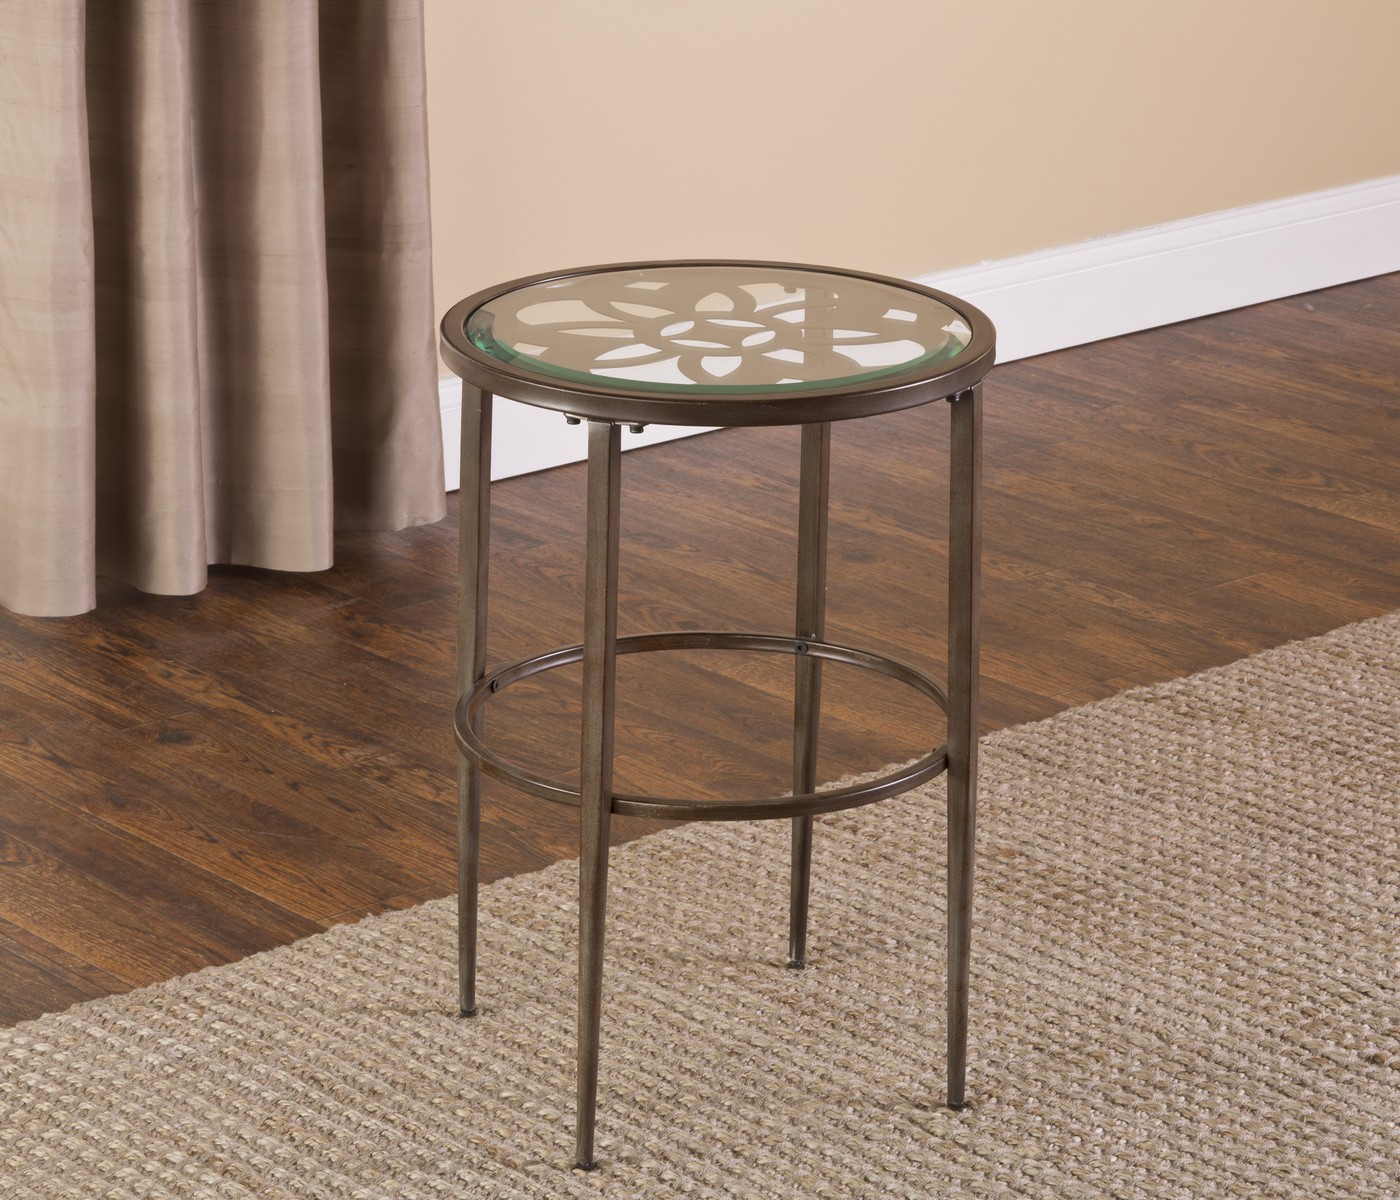 Hillsdale Marsala End Table - Gray with Brown Rub